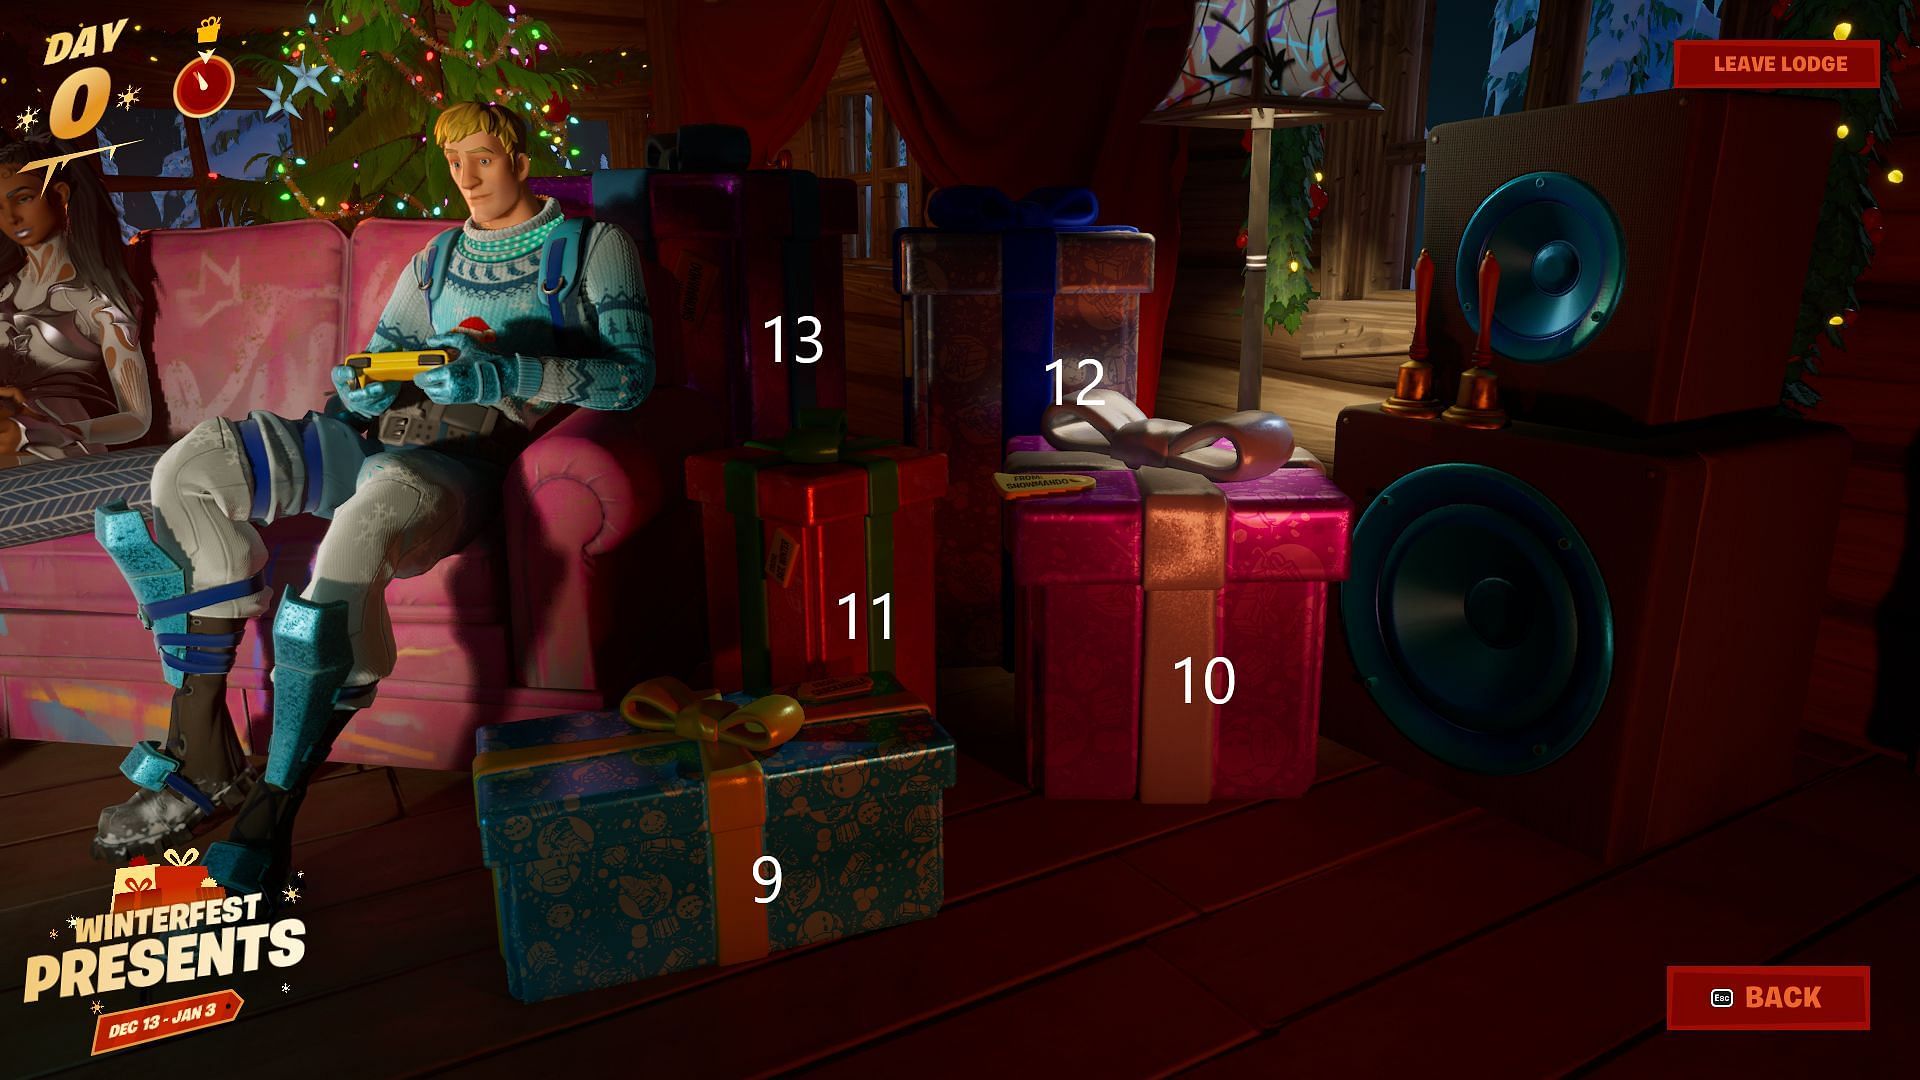 Five presents are located on the right-hand side of the room (Image via Epic Games)